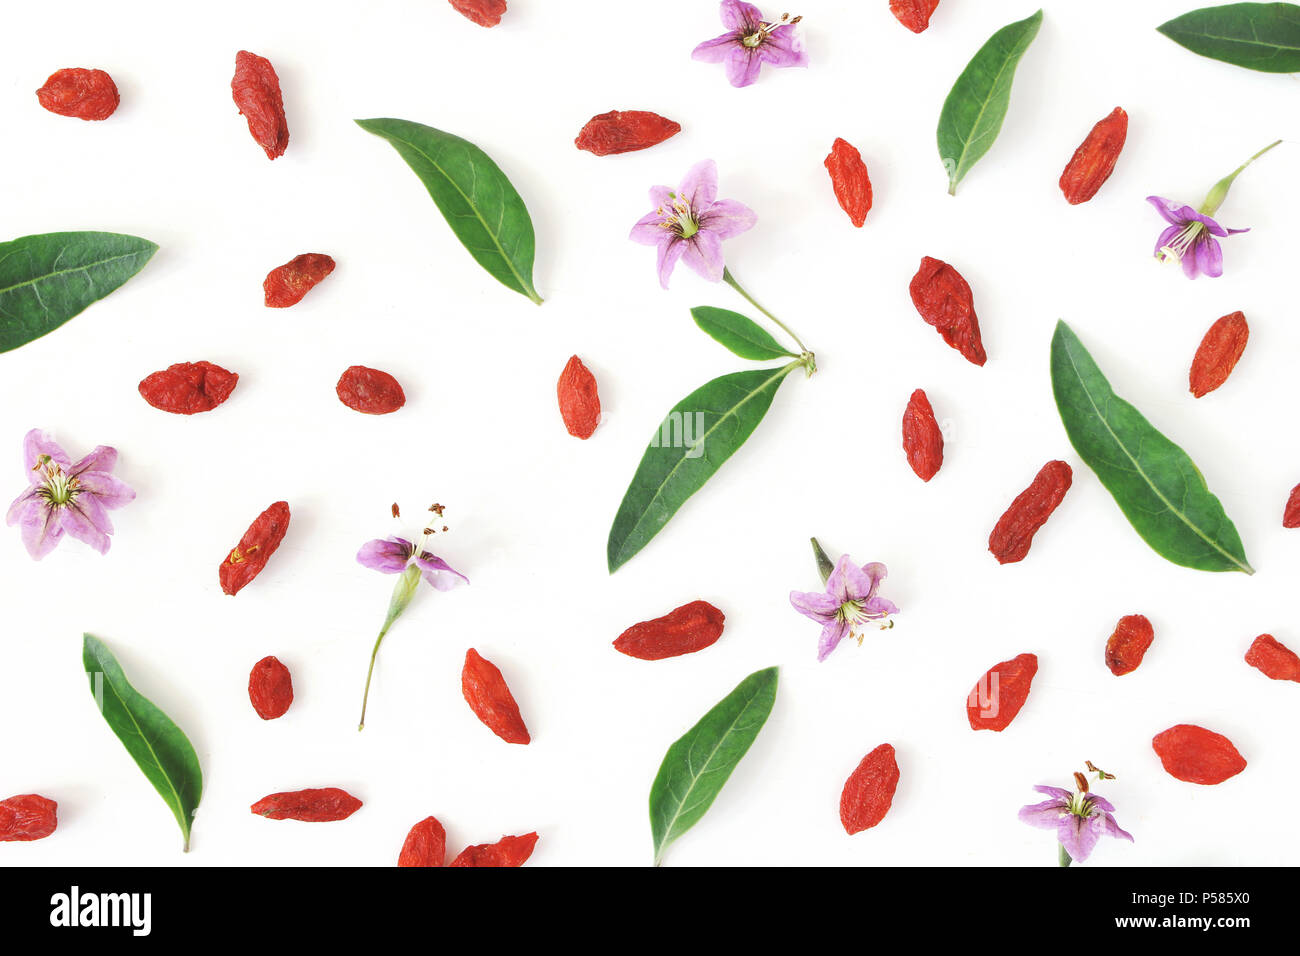 Closeup of Goji berries, Lycium barbarum. Dried Asian fruit, leaves and blossoms isolated on white wooden background. Healthy superfood. Floral pattern. Flatlay, top view. Stock Photo